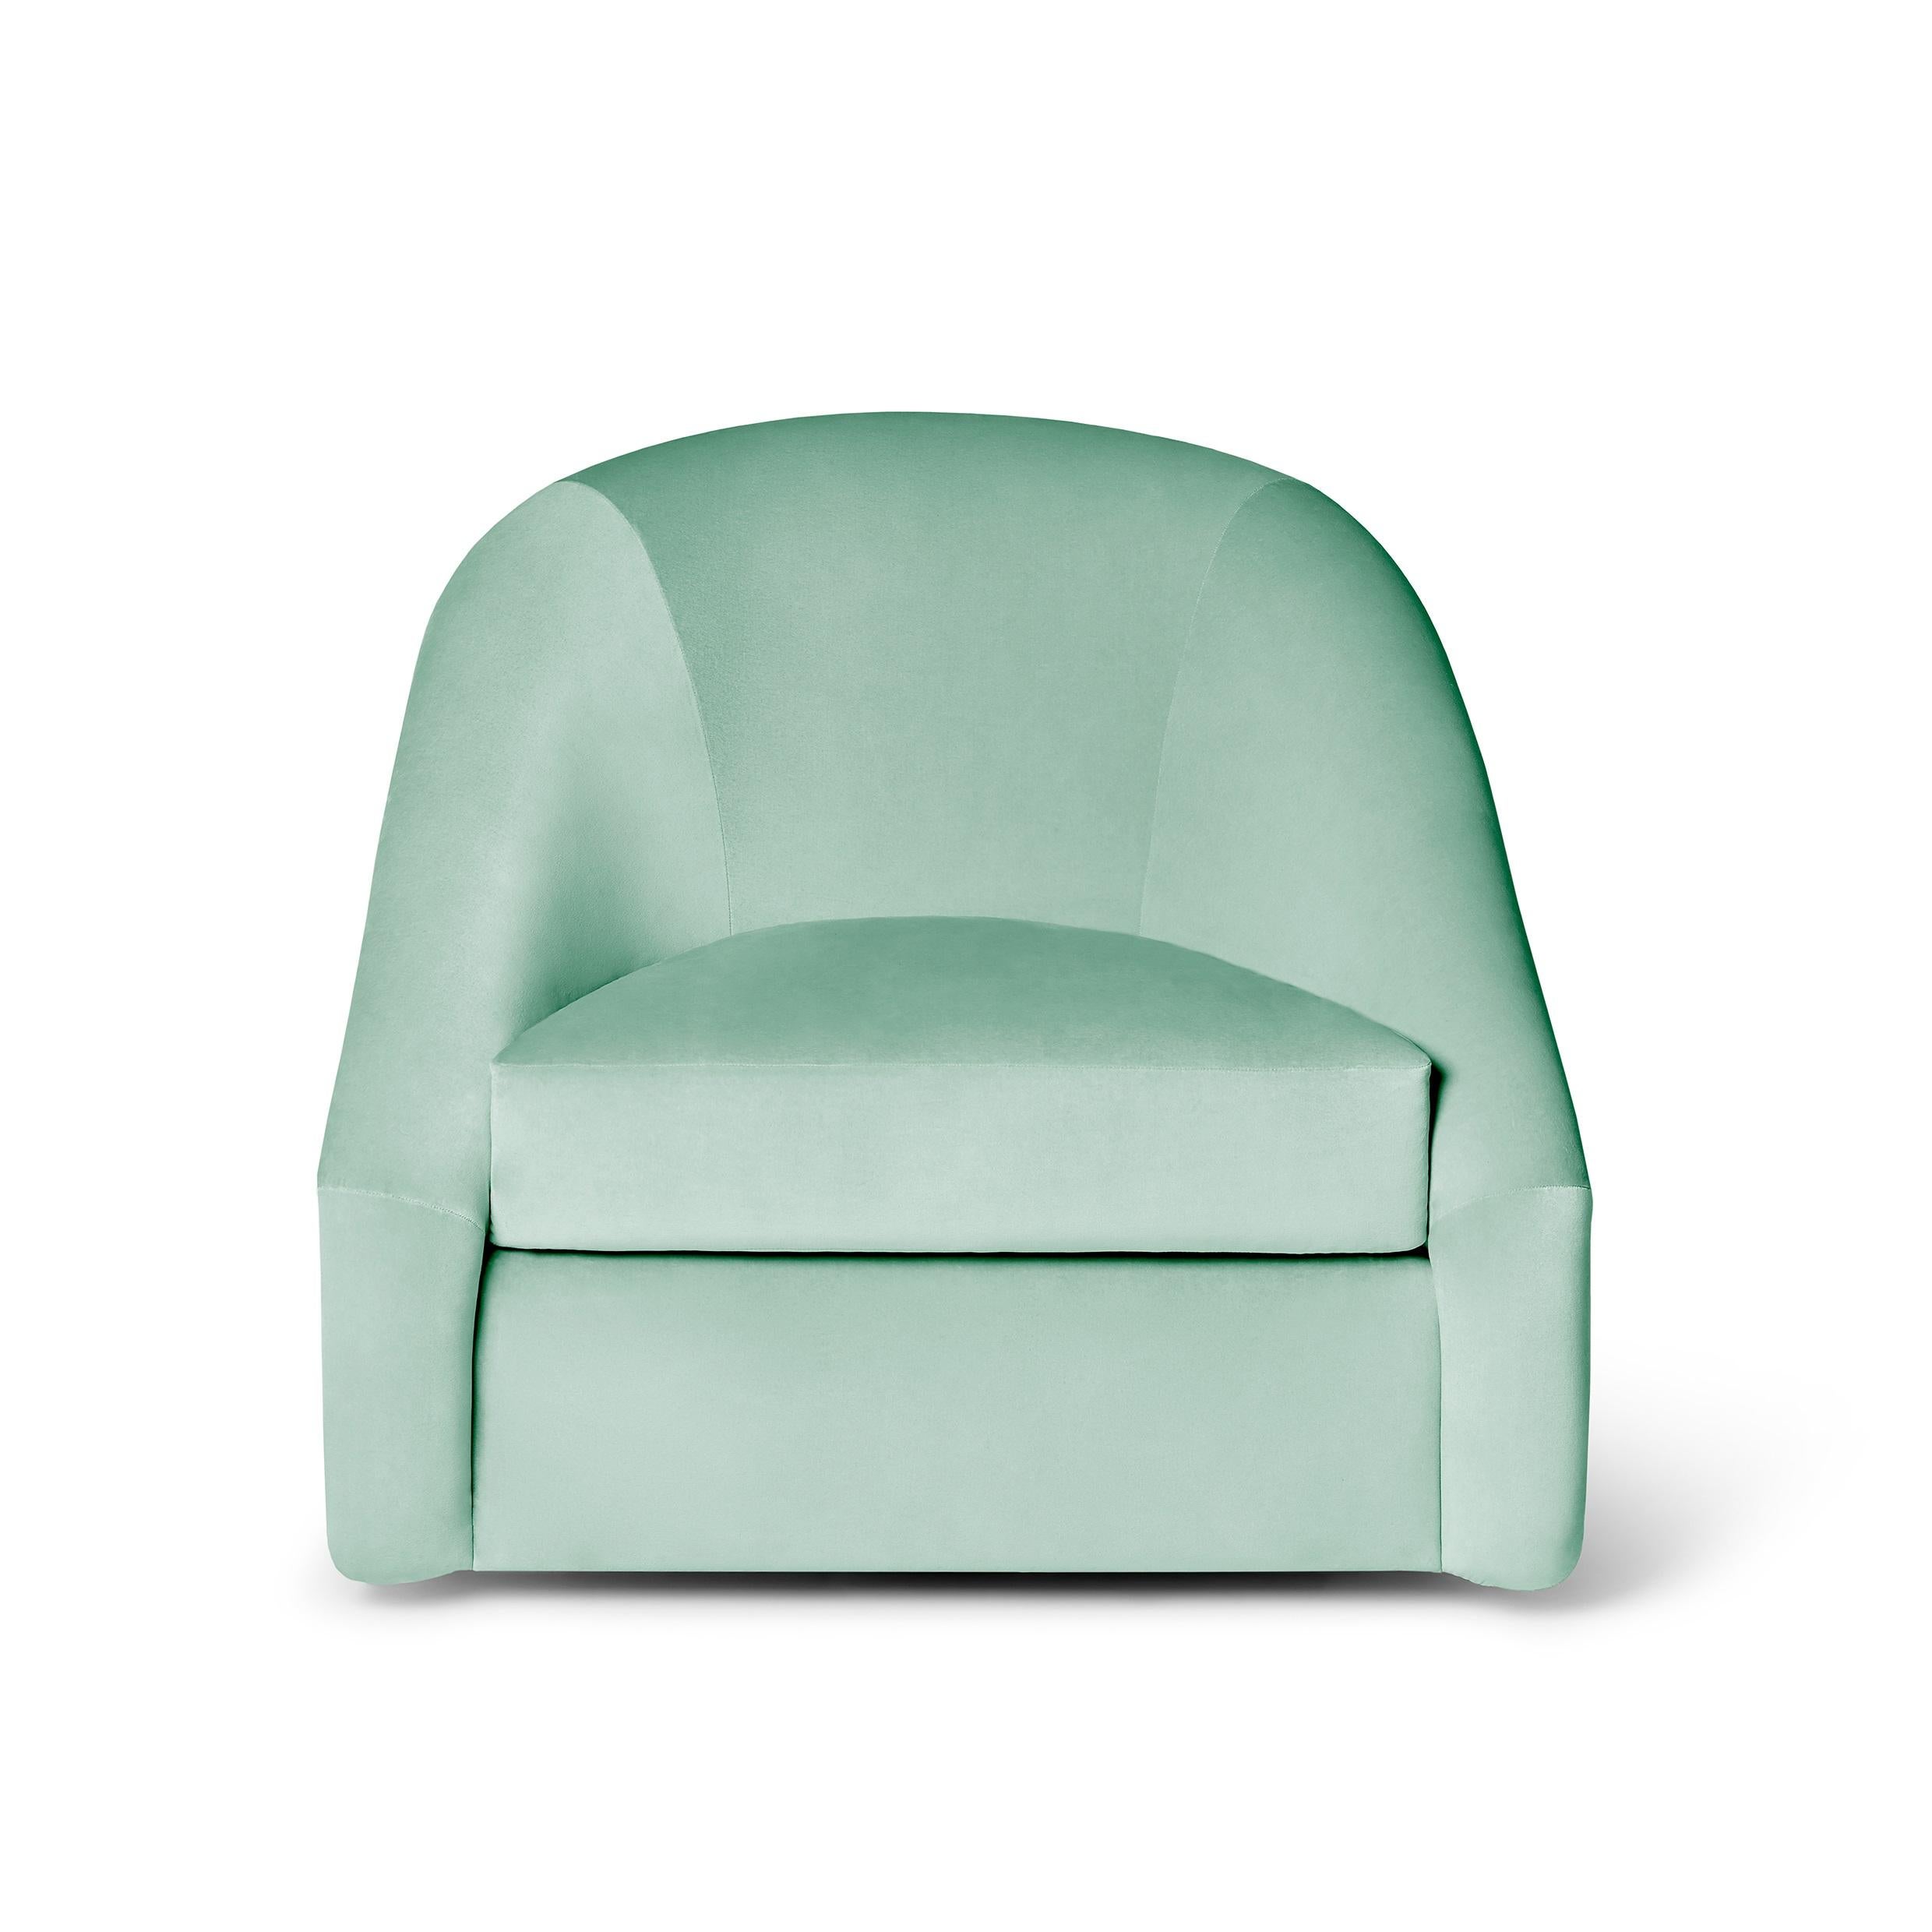 This swivel armchair offers functionality and style. Its ergonomic design ensures comfort, while the precise seaming showcases meticulous craftsmanship. The curved shapes enhance its visual appeal, and the swivel mechanism adds versatility.